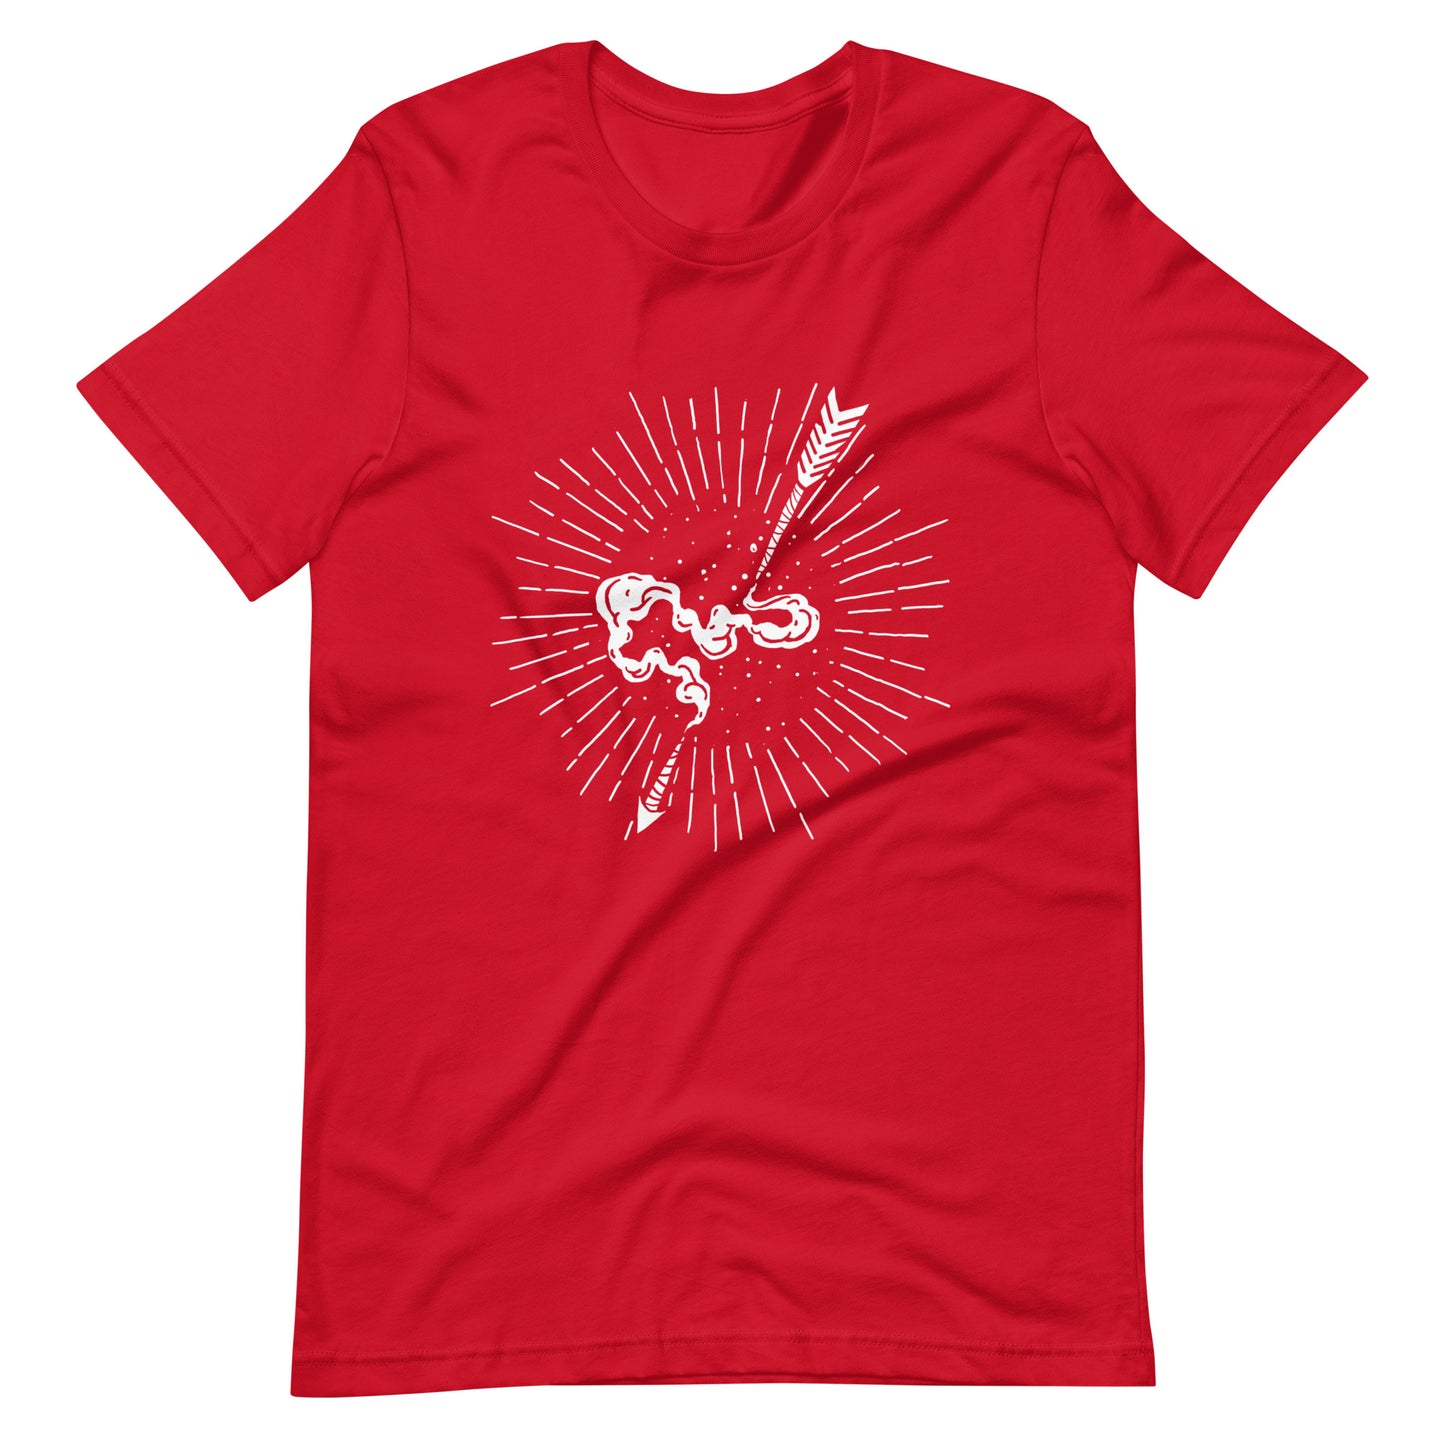 Skull Triangle - Men's t-shirt - Red Front